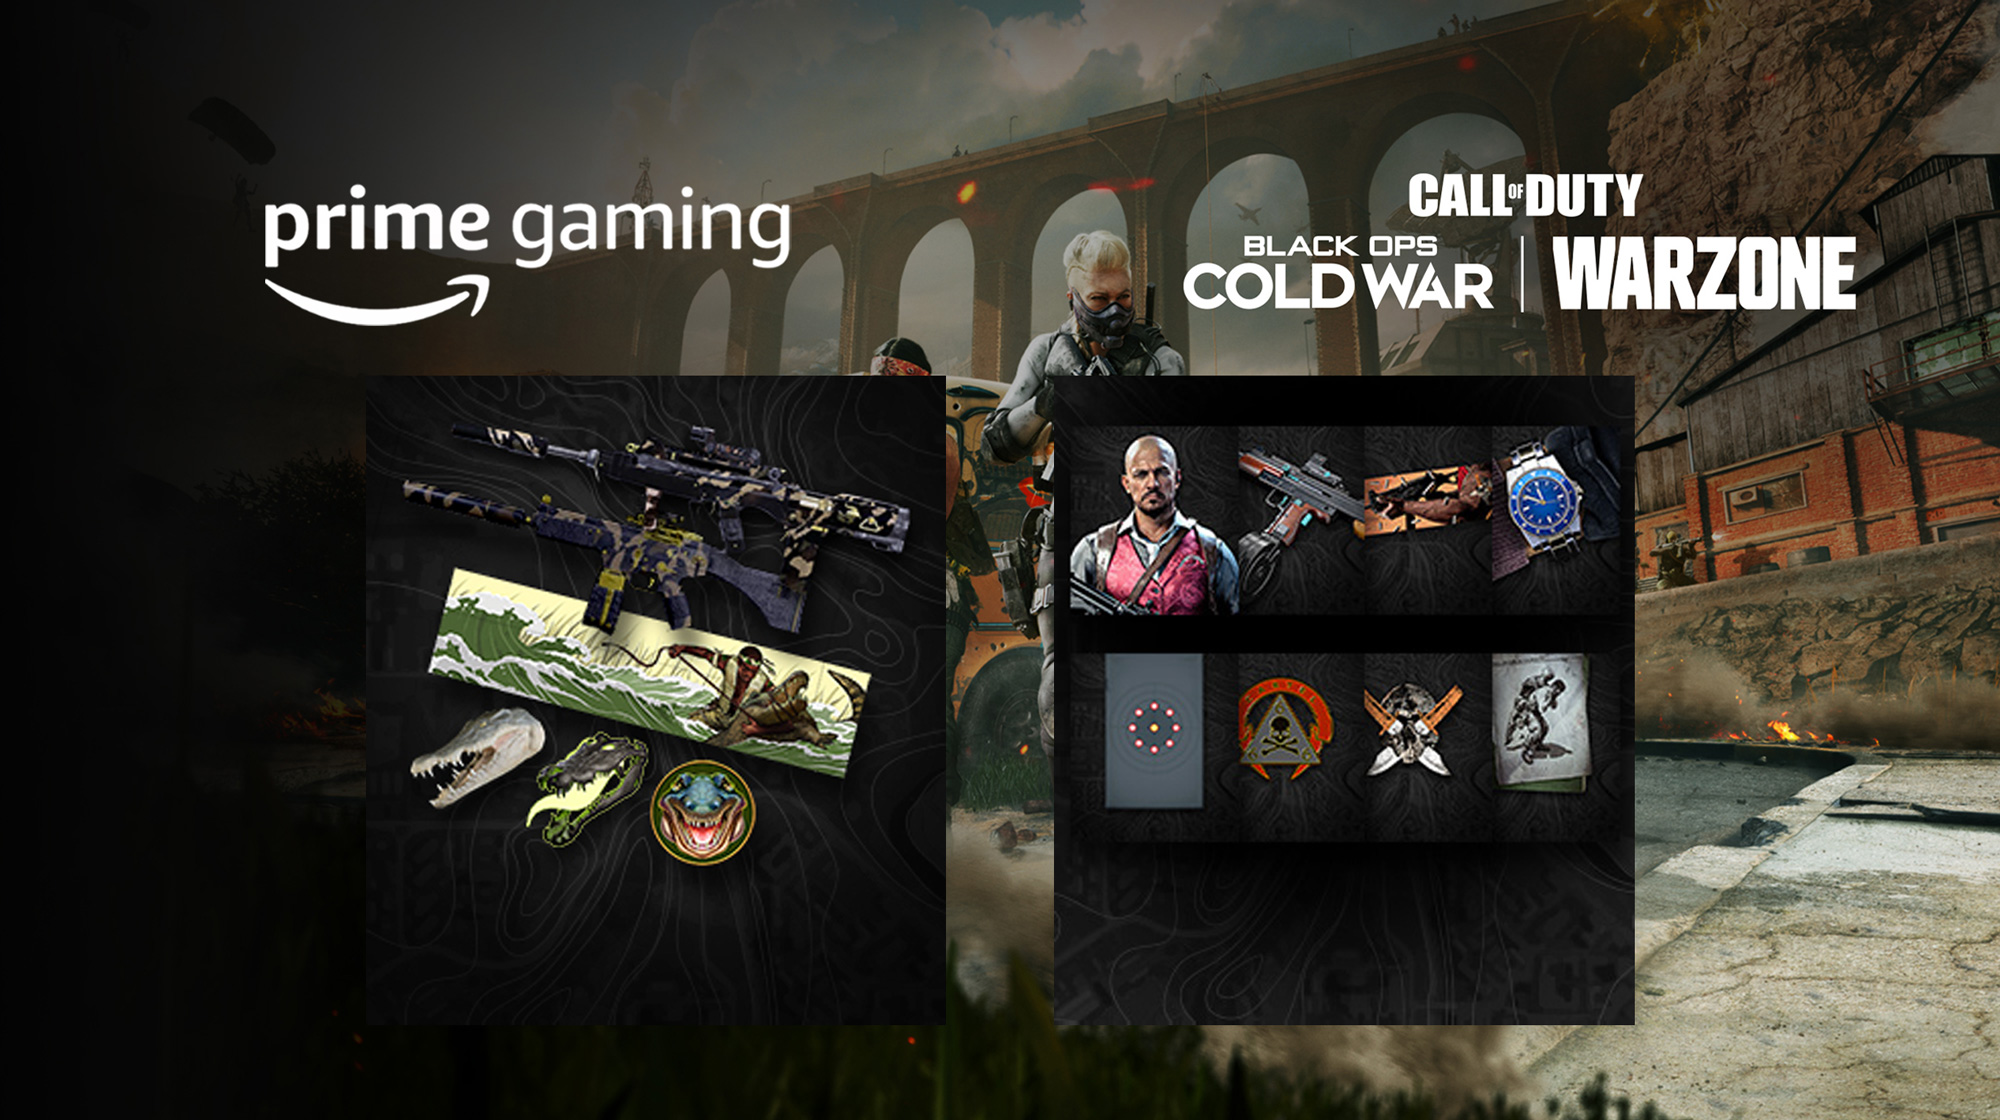 How To CLAIM  Prime GAMING Reward BUNDLES, Call Of Duty Black Ops  Cold War